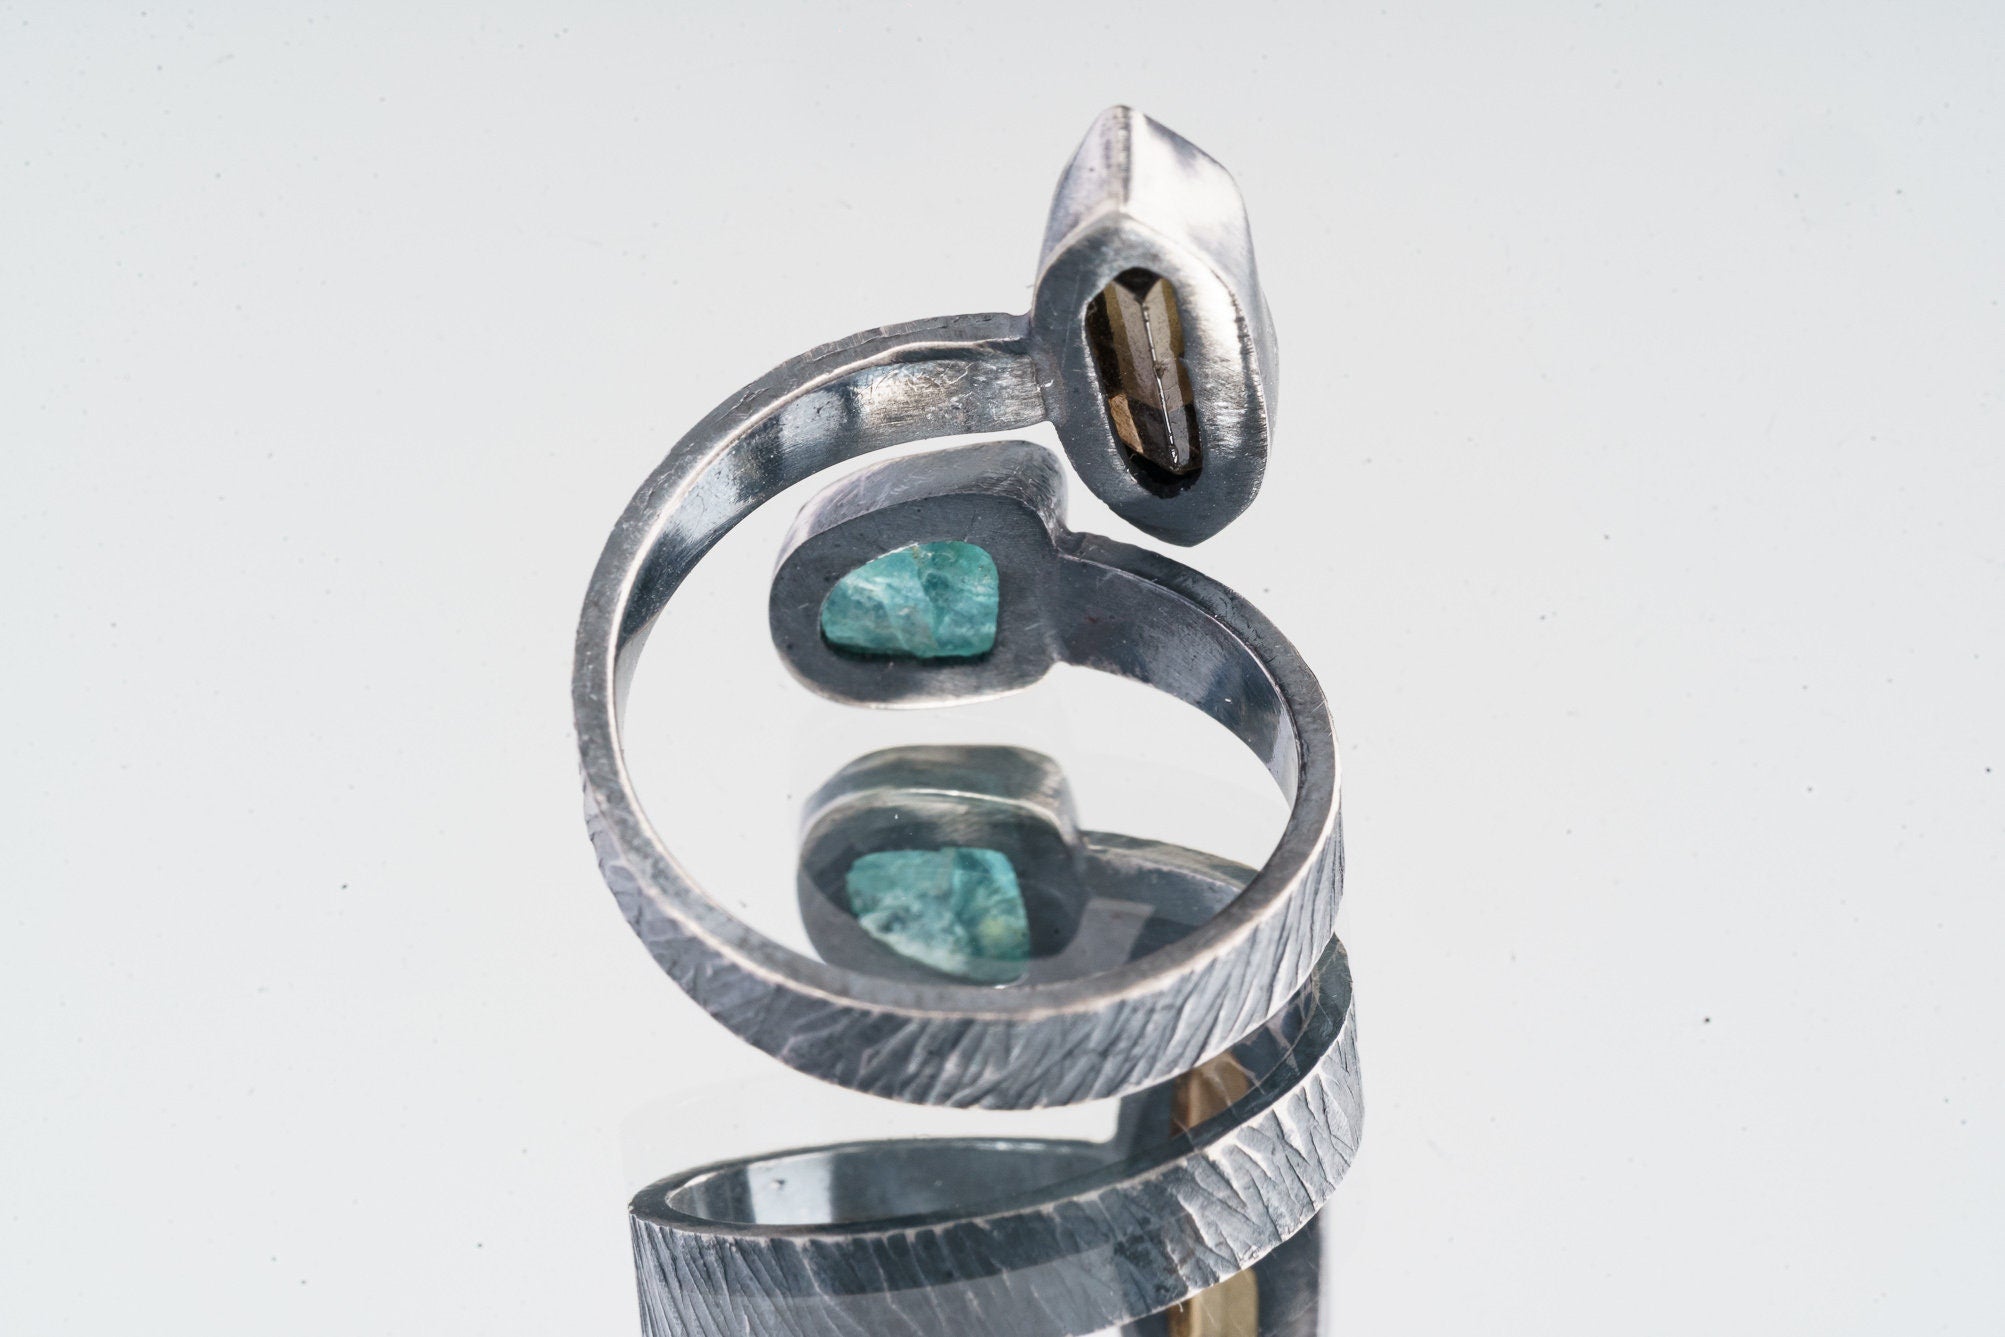 DT Cut Smoky Quartz & Apatite - 925 Sterling Silver - Double Stone - Textured, Oxidised - Open Ring Band - Adjustable US 4 - 10 - NO/13